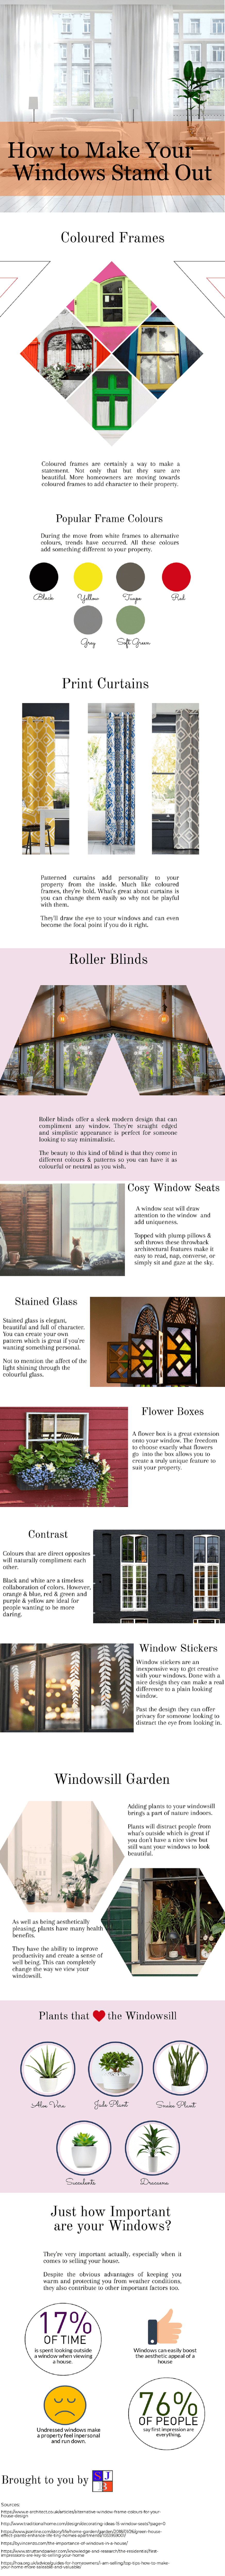 Windows Stand Out - Infographic